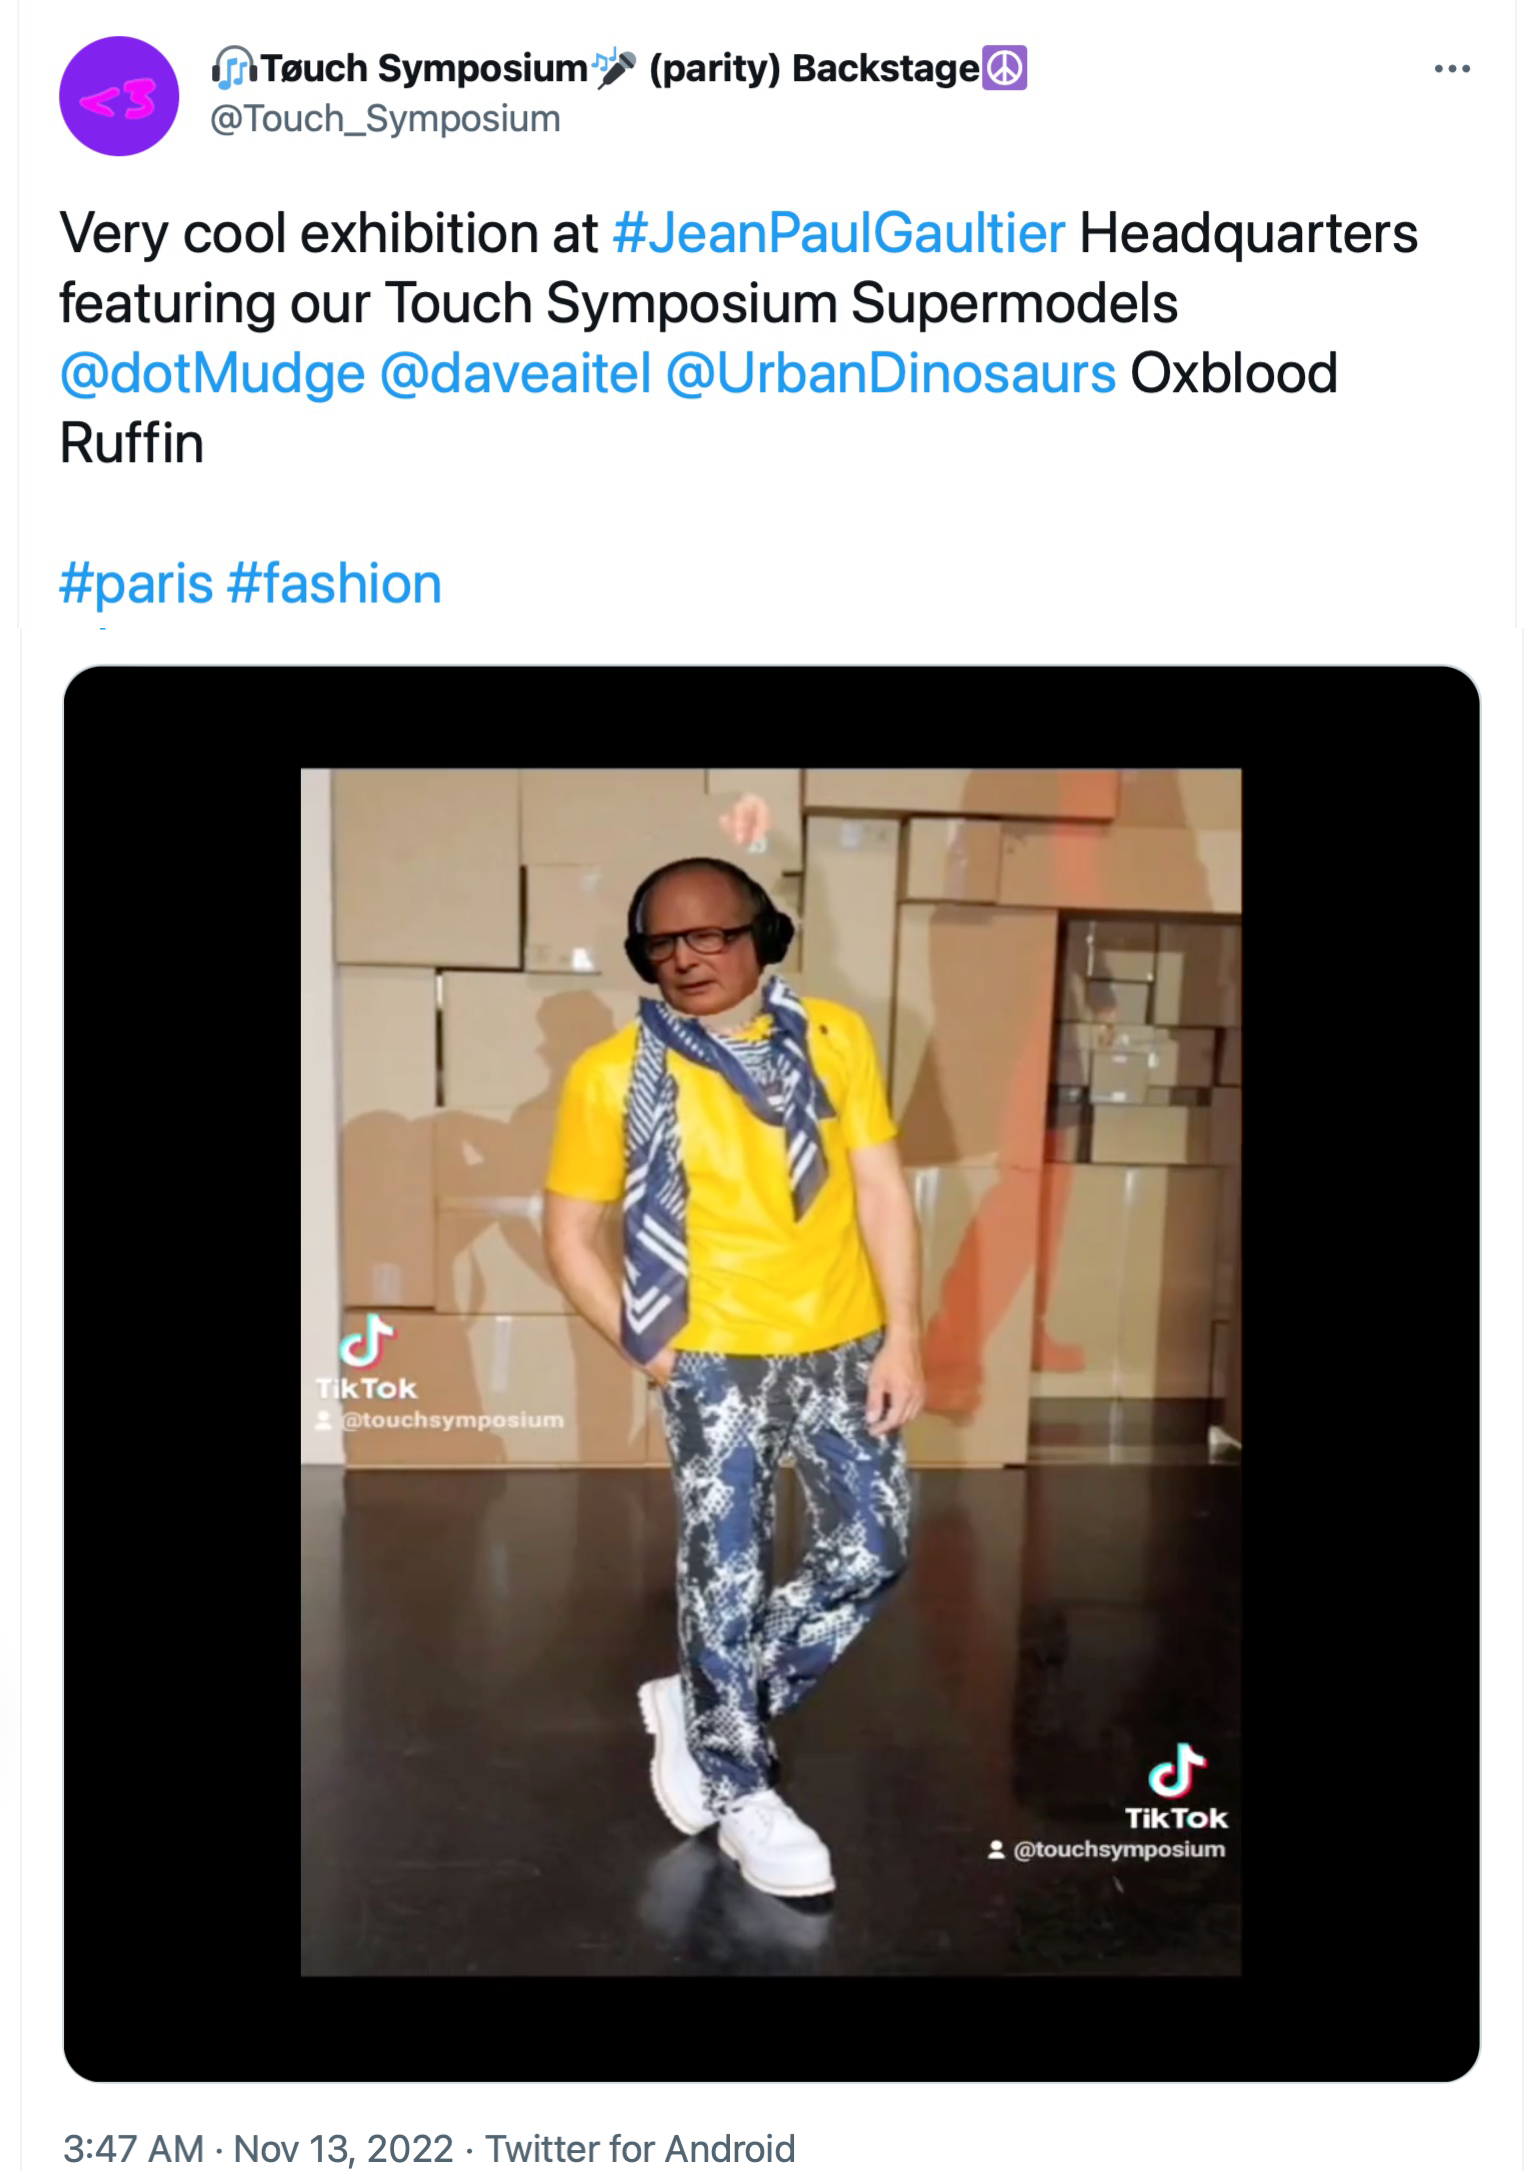 13 Nov 2022 tweet from @Touch_Symposium: A professionally-taken full-length photo of a male fashion model, but superimposed over the model's head is a crudely cut-and-pasted picture of Oxblood Ruffin's head. The text reads: 'Very cool exhibition at #JeanPaulGaultier Headquarters featuring our Touch Symposium Supermodels @dotMudge @daveaitel @UrbanDinosaurs Oxblood Ruffin #paris #fashion'